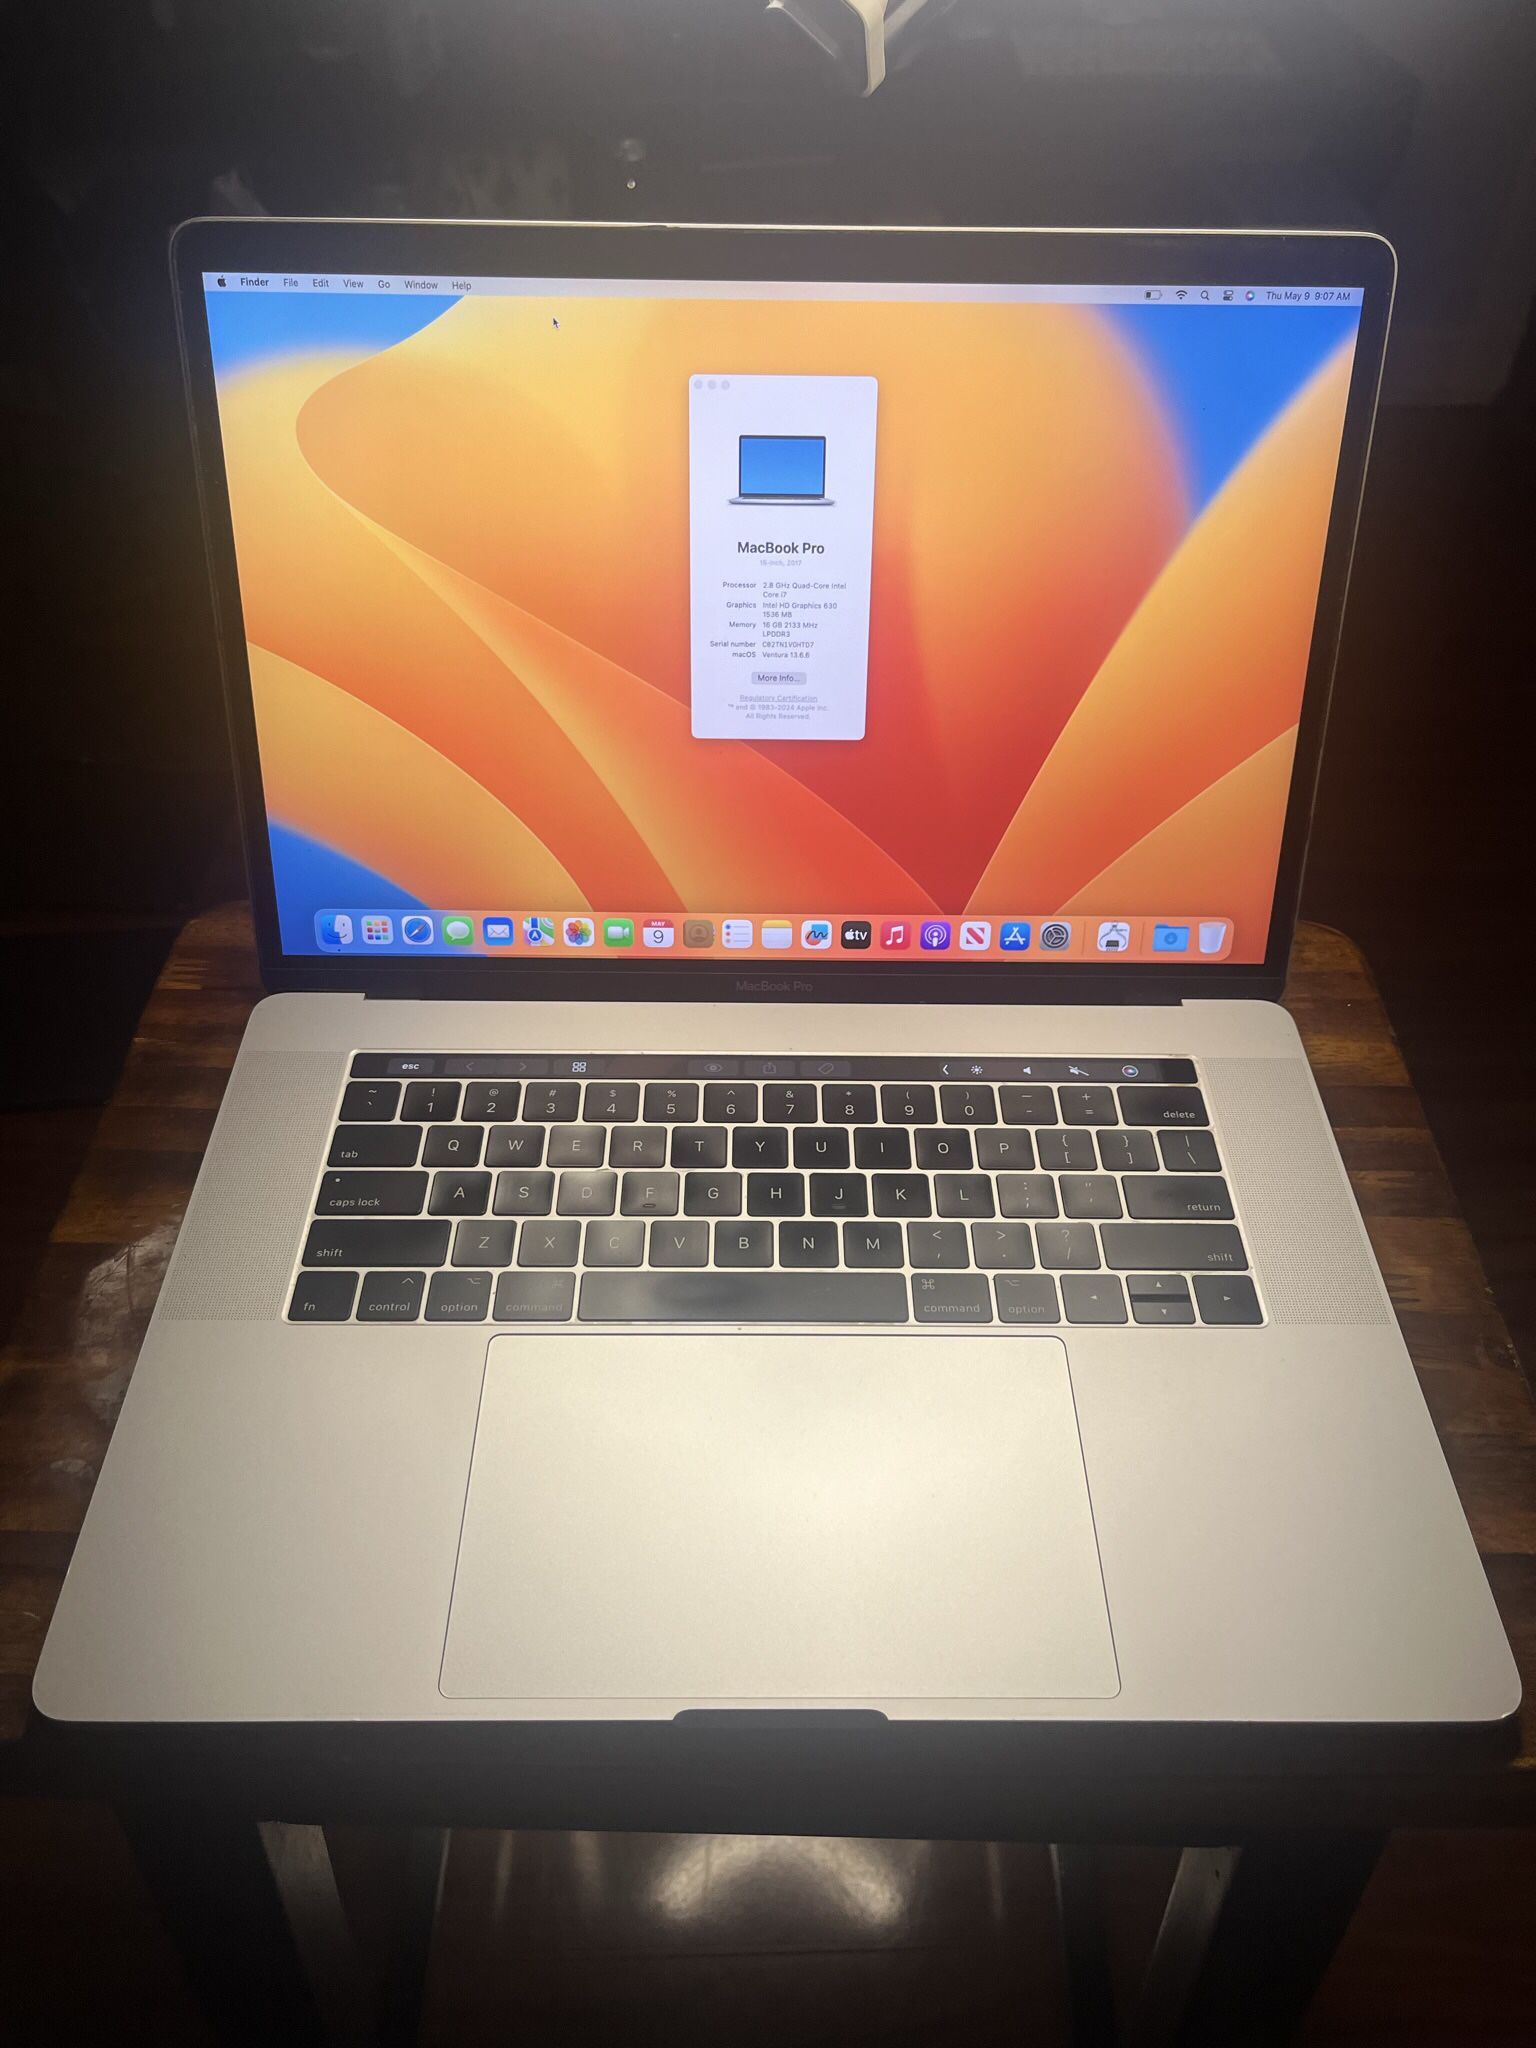 2017Macbook Pro 16 Inch 16GB intel i7 6-Core 250GB 395 Count on Battery like New NO Ding Or Dent NEW YEAR DEAL.